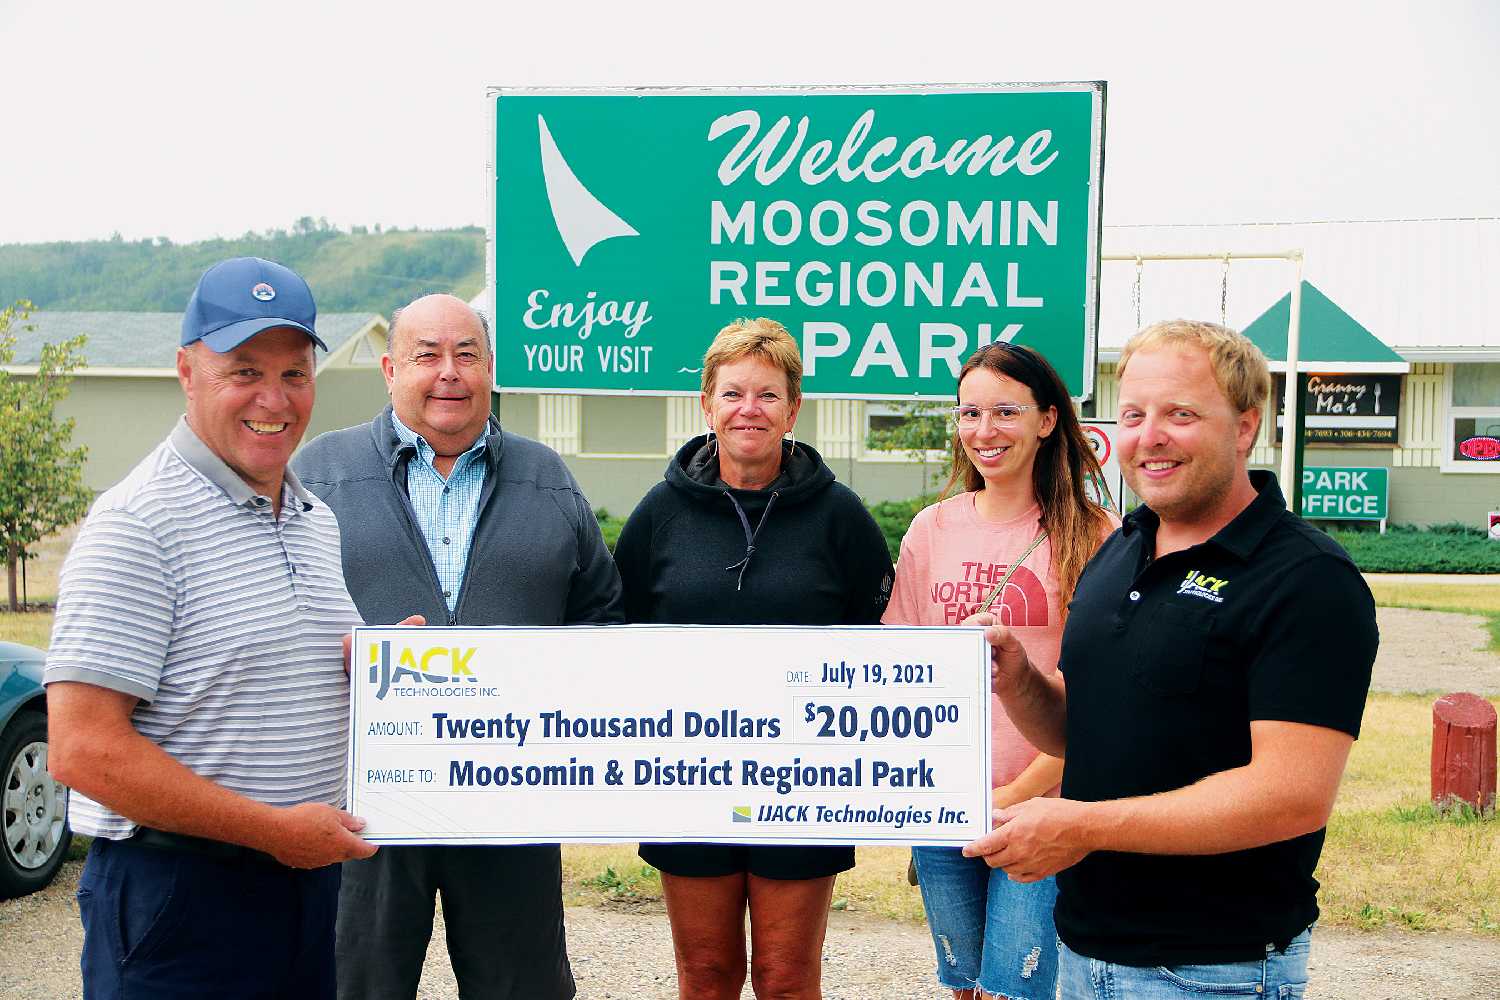 Dan and Olga McCarthy of IJACK Technologies donated $20,000 to Moosomin Regional Park recently to help cover the cost of electrical upgrades at the park to accommodate larger RVs. From left are Regional Park Manager Wayne Beckett, Park Board Chair Chris Davidson, Park Board member Karen Hebert, and Olga and Dan McCarthy.